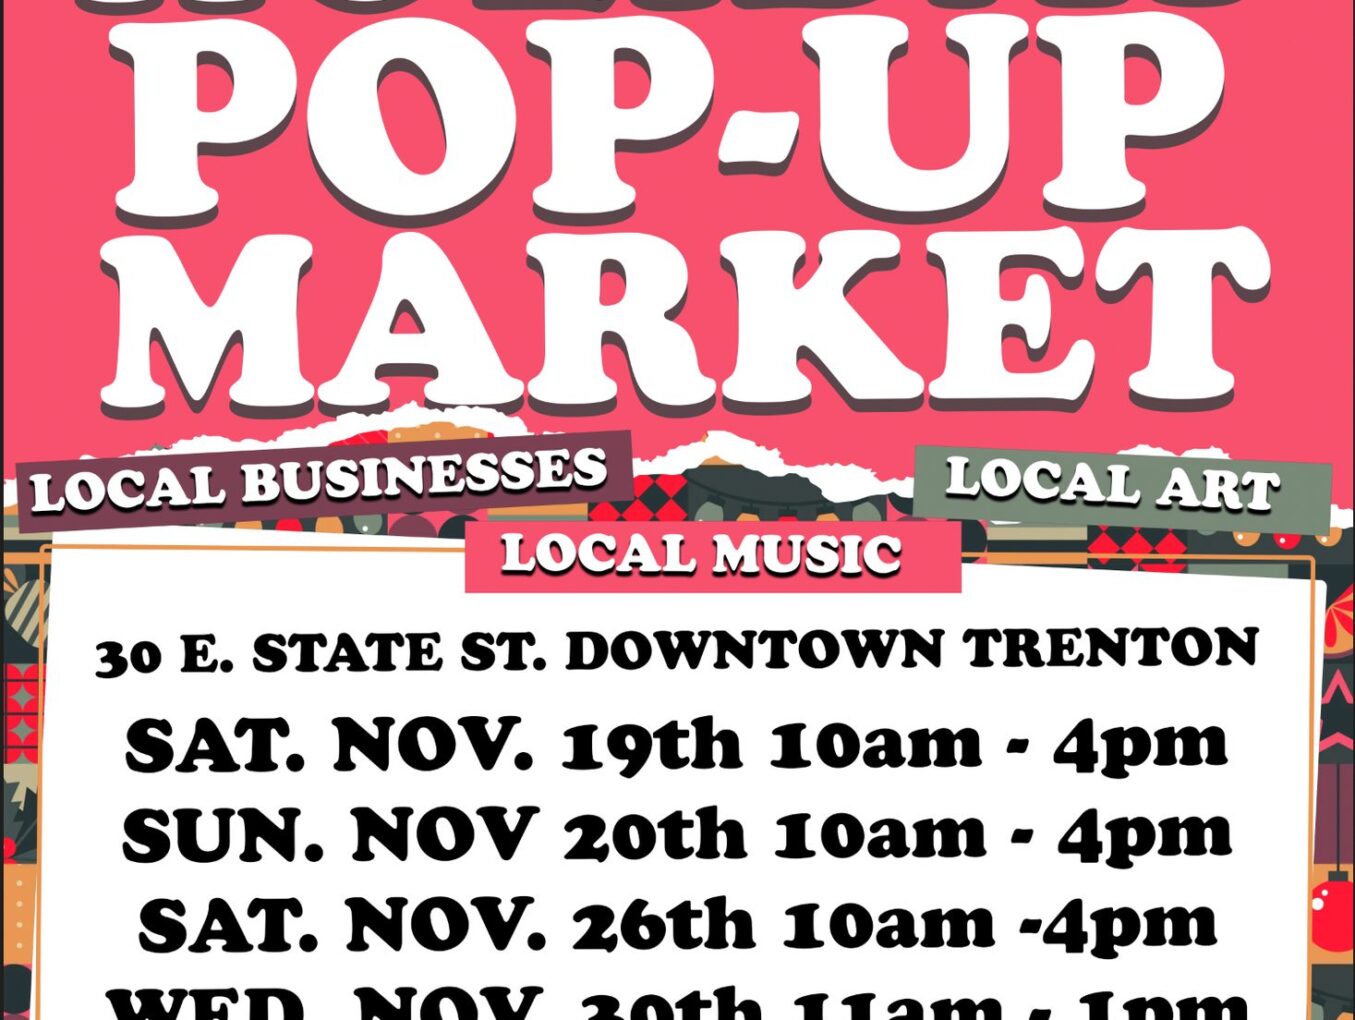 Holiday Pop-Up Market Announced for Downtown Trenton